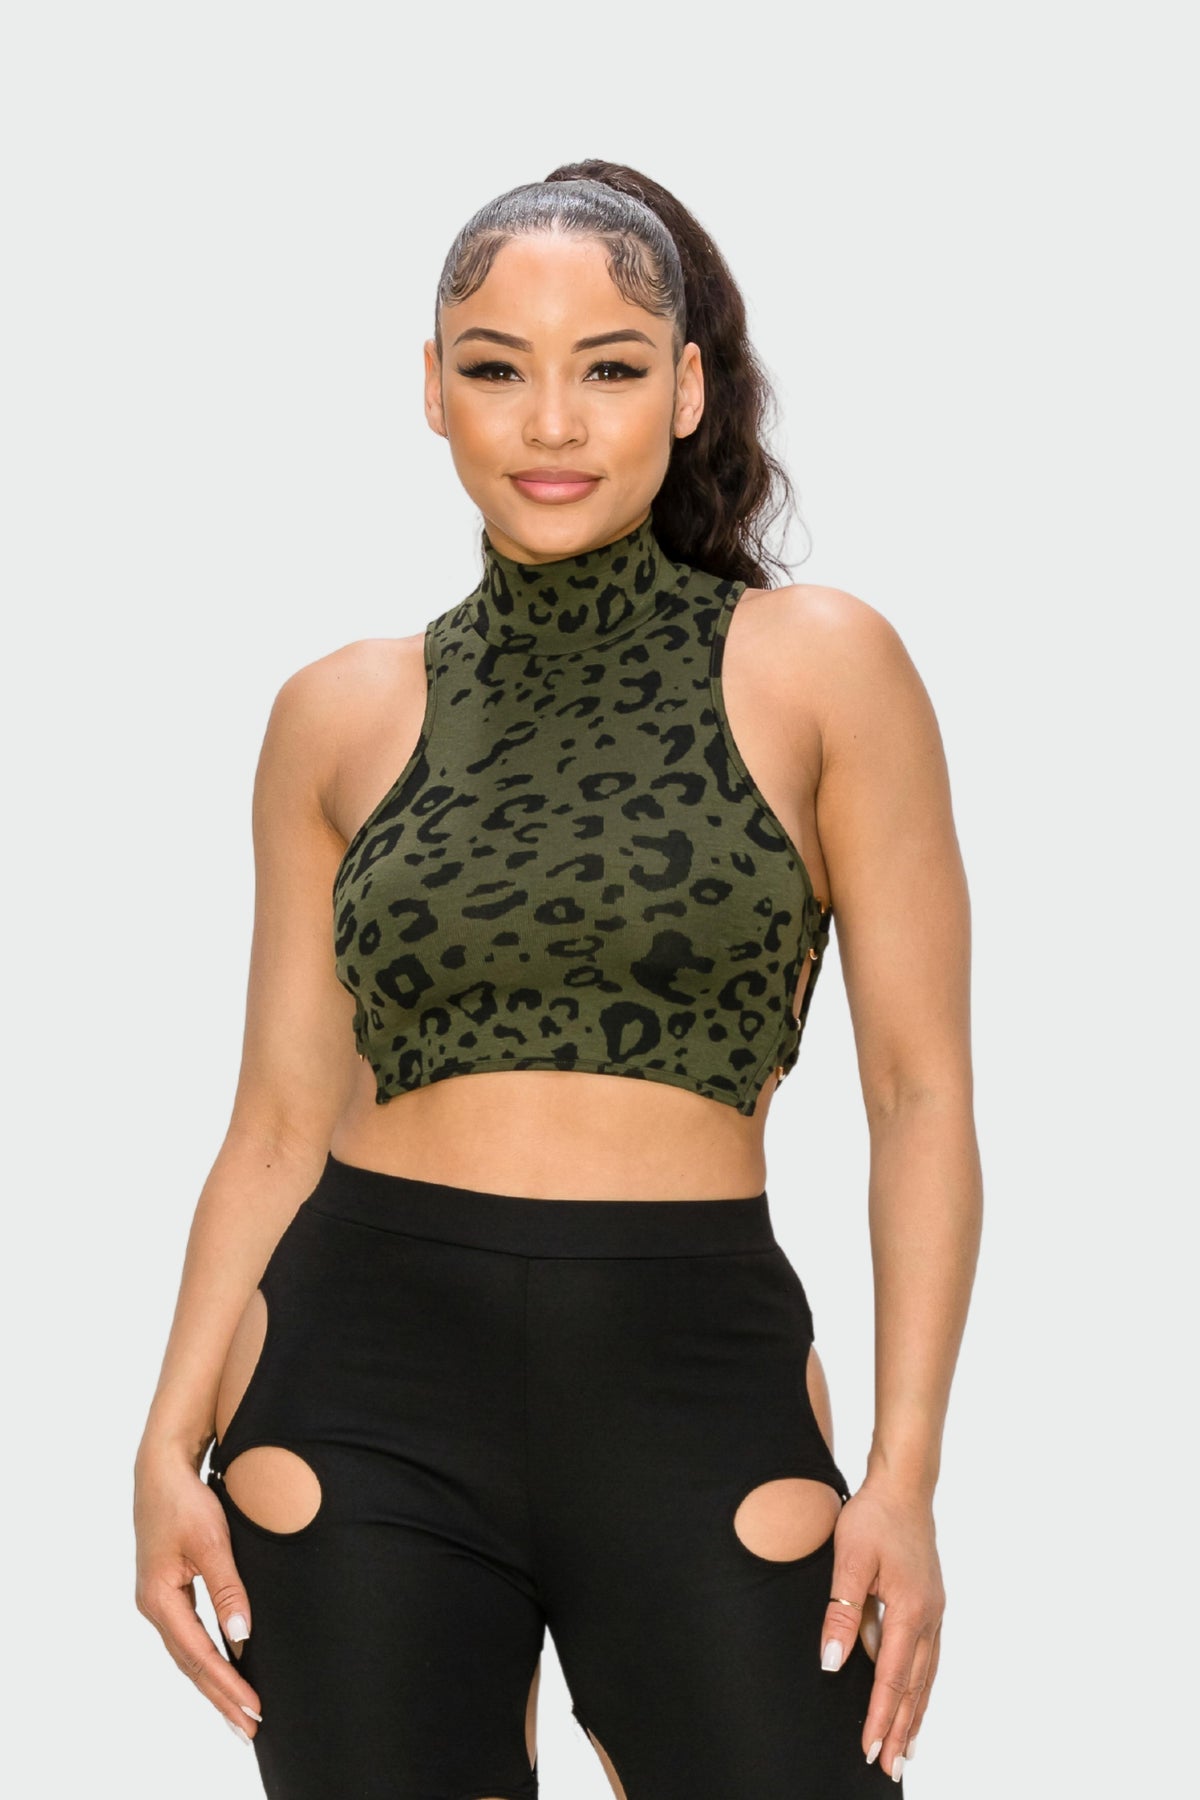 Khaki and Black Leopard Printed O-Ring Crop Top